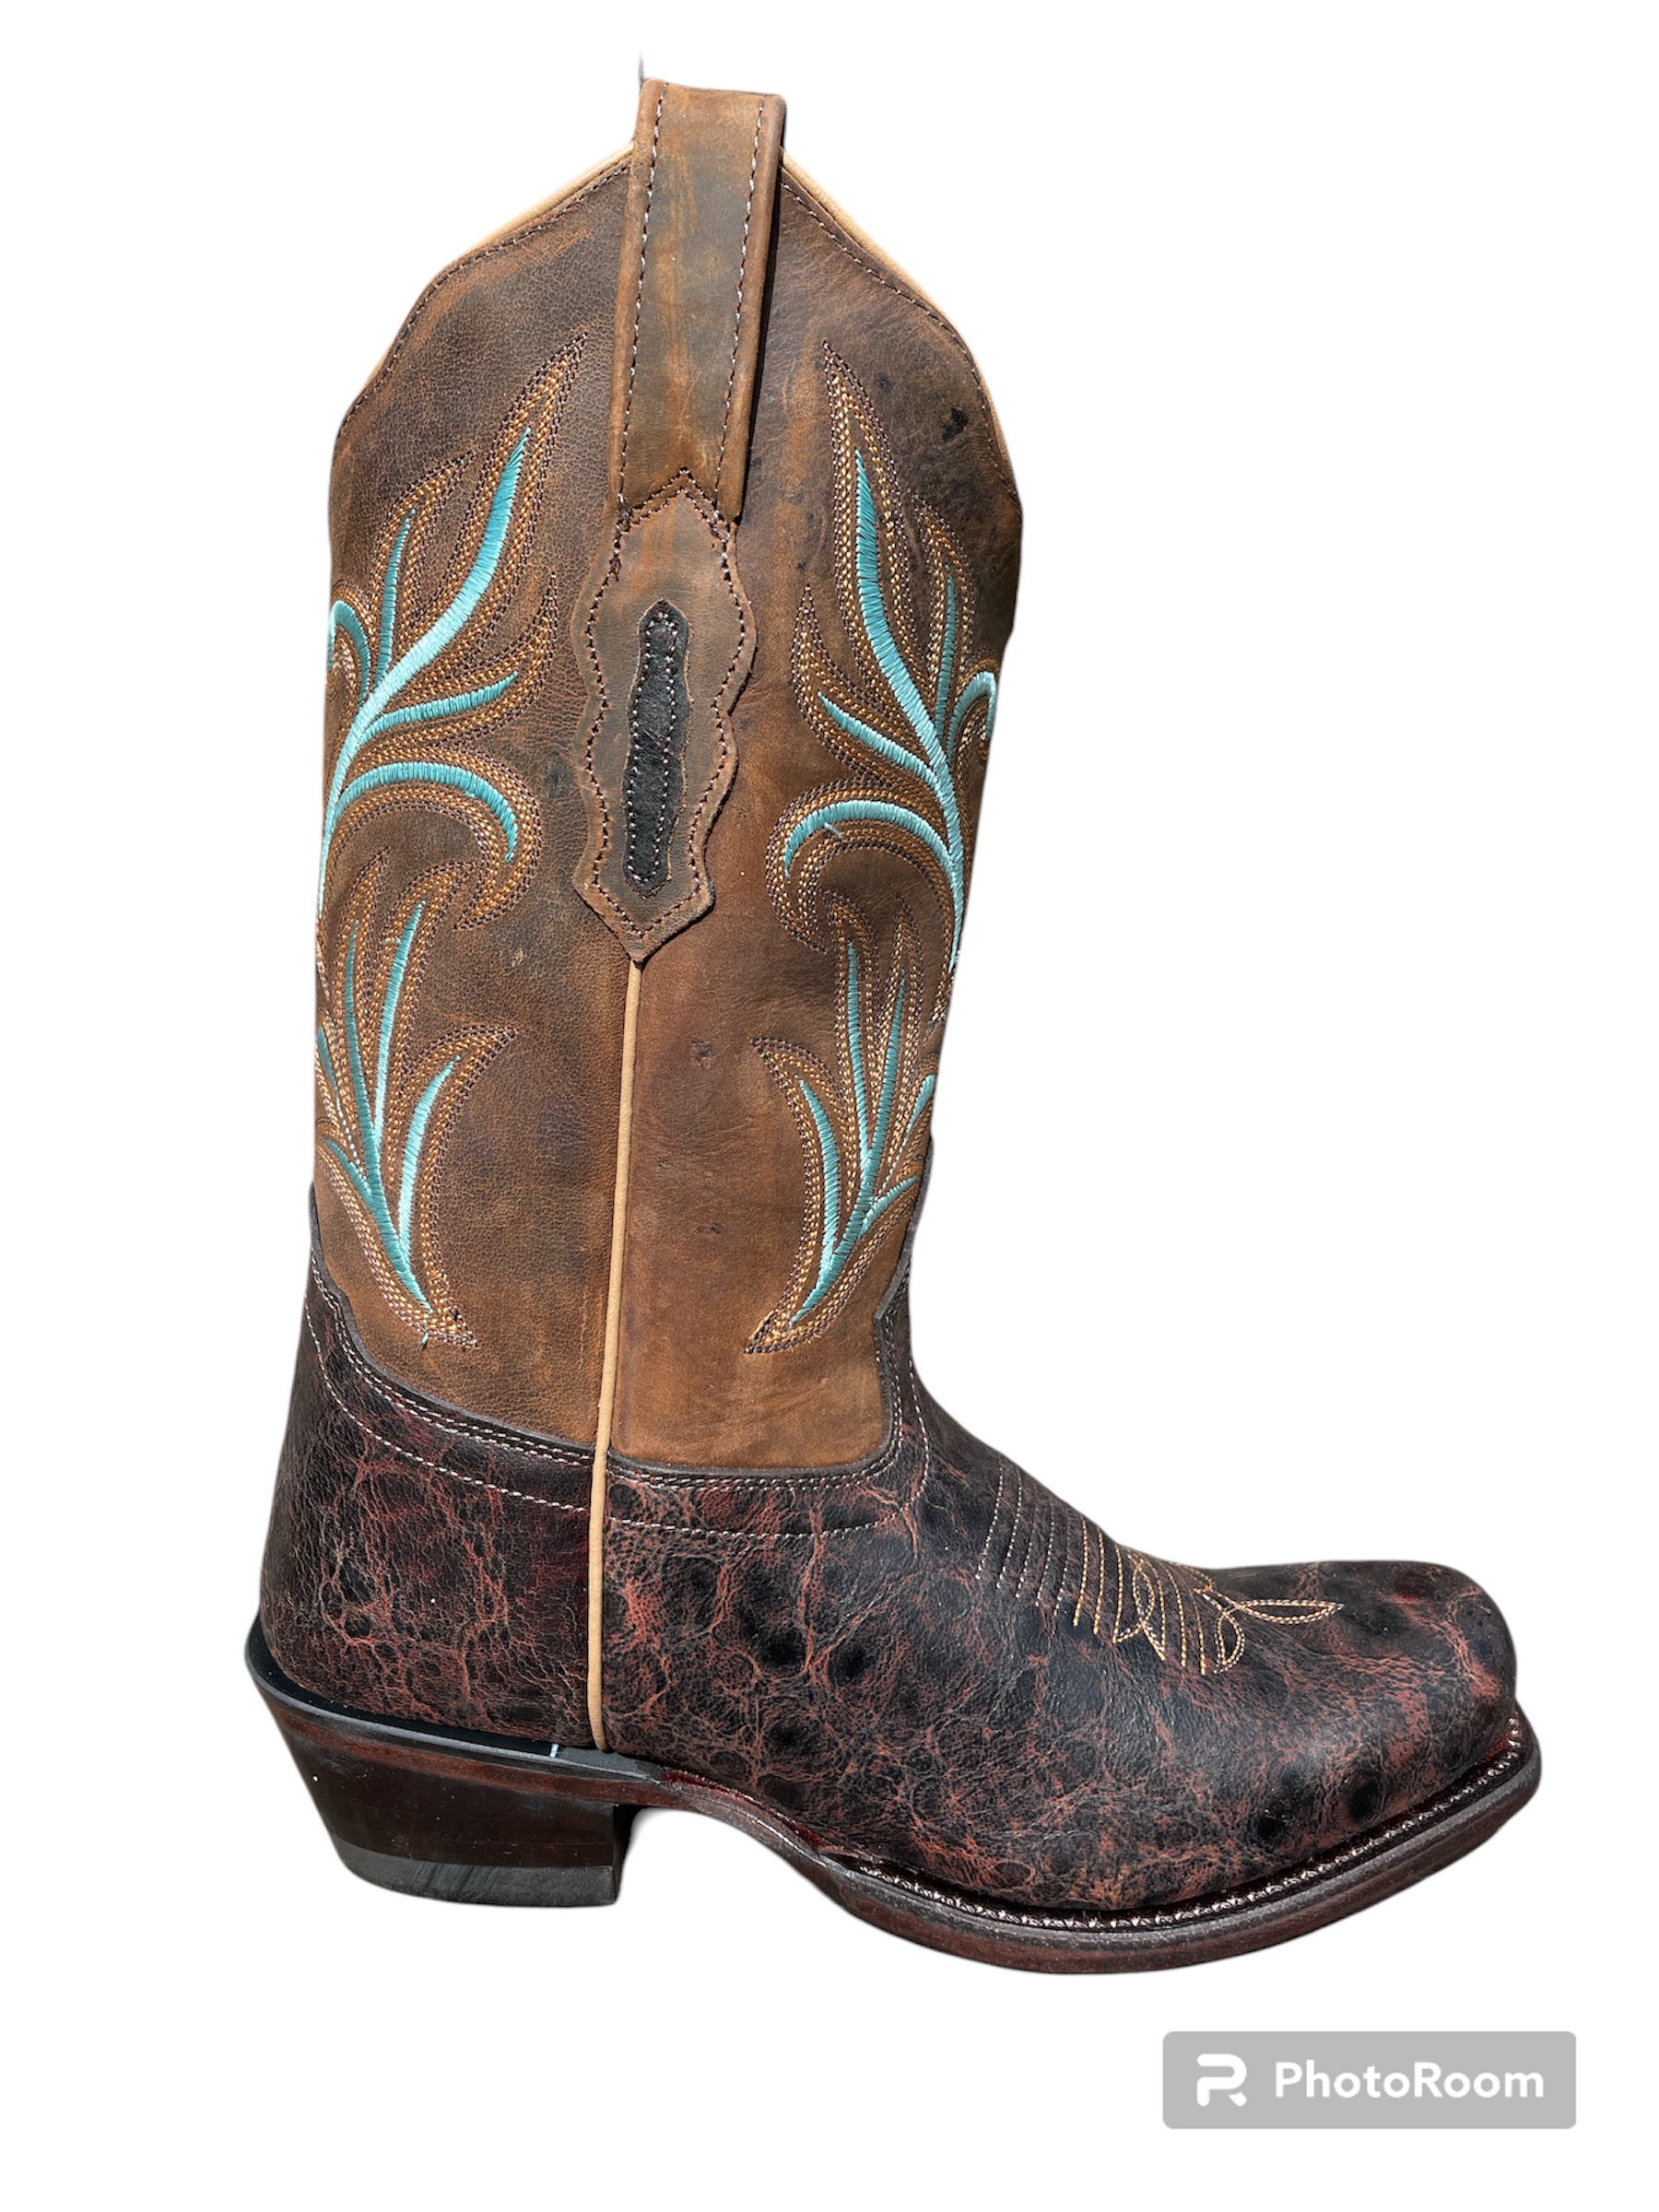 Cowboy boots ladies 18010E, brown, turquoise embroidery, B-WARE